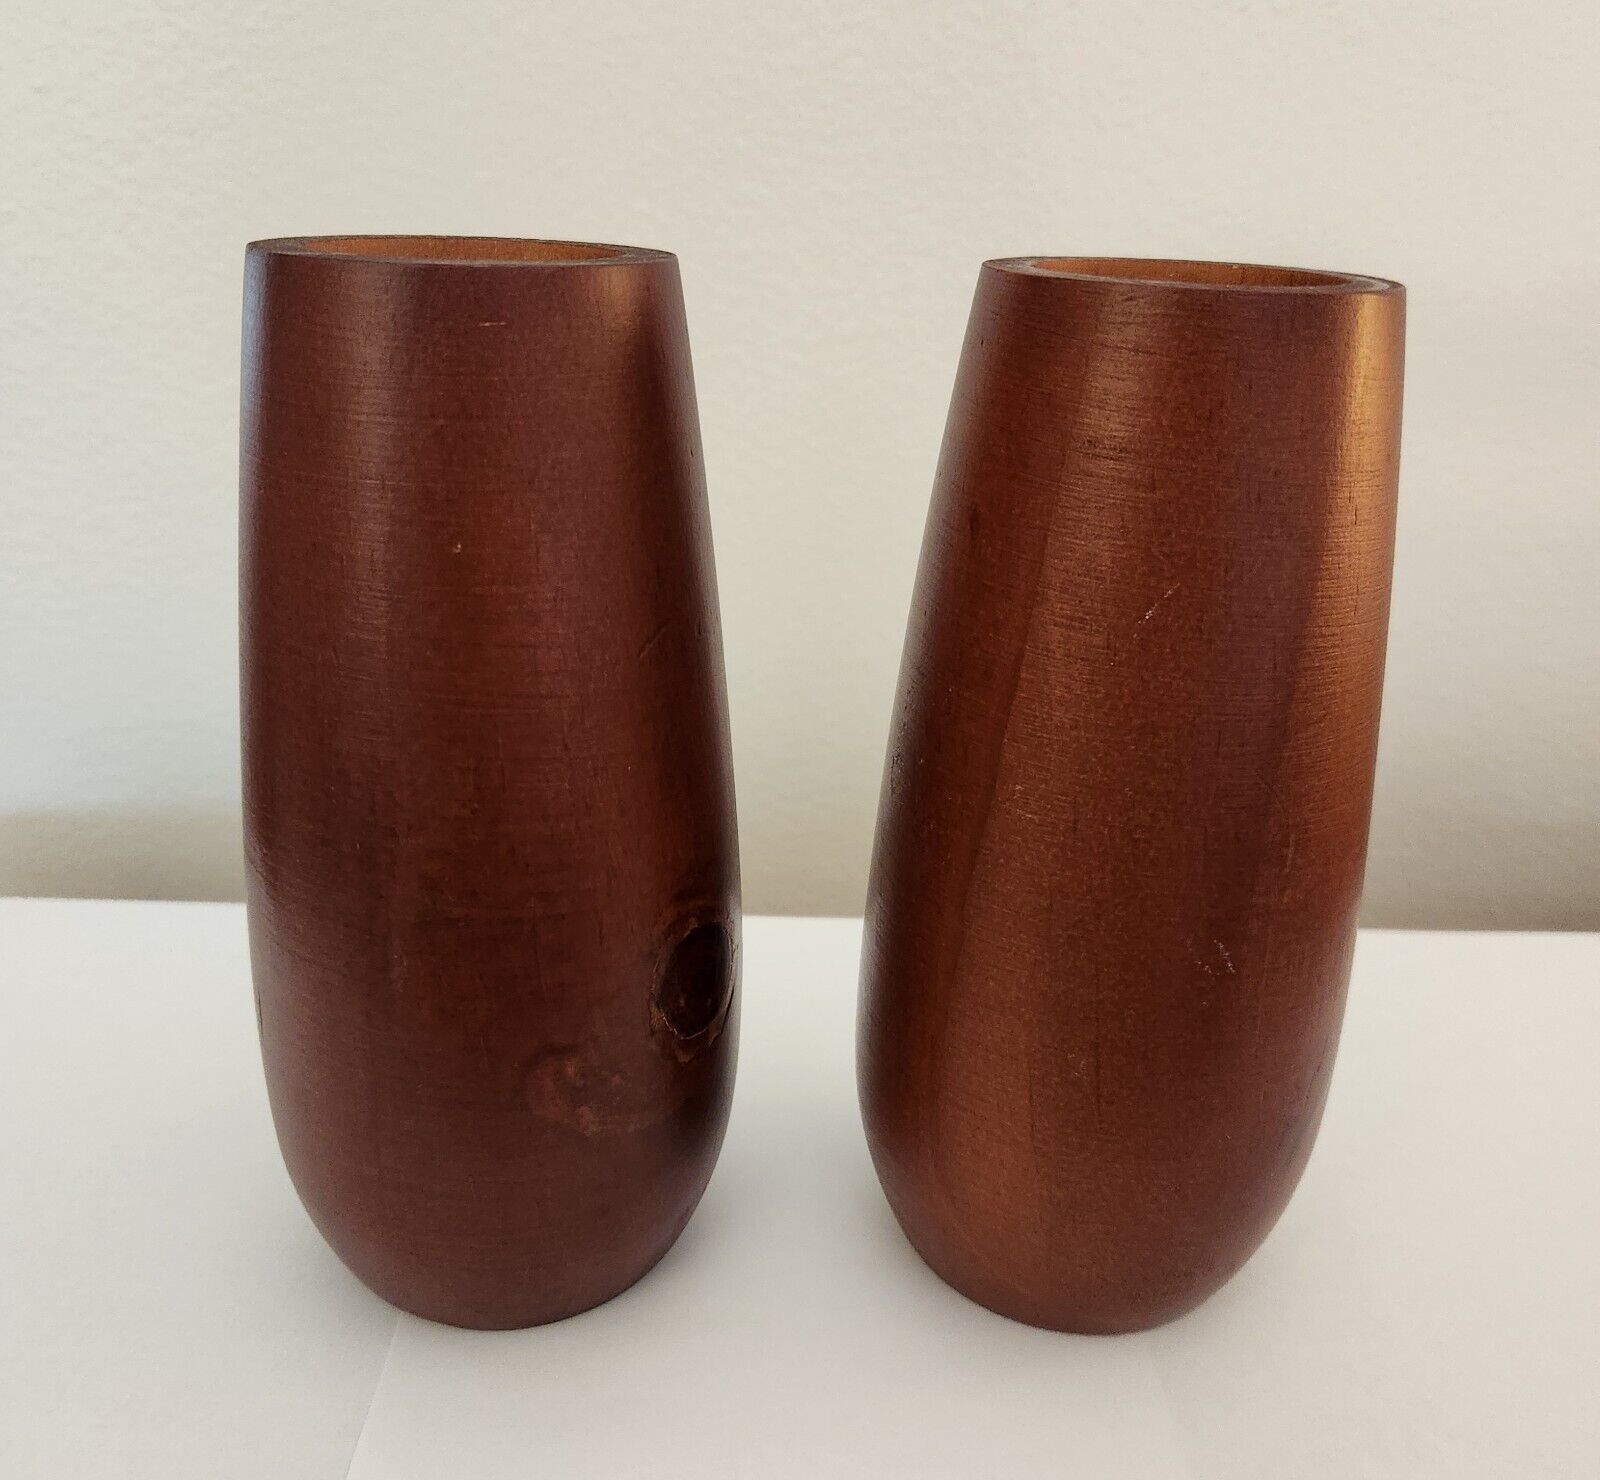 Yankee Candle - Candle Holders Brown Wood Round - Set Of 2 Candleholders